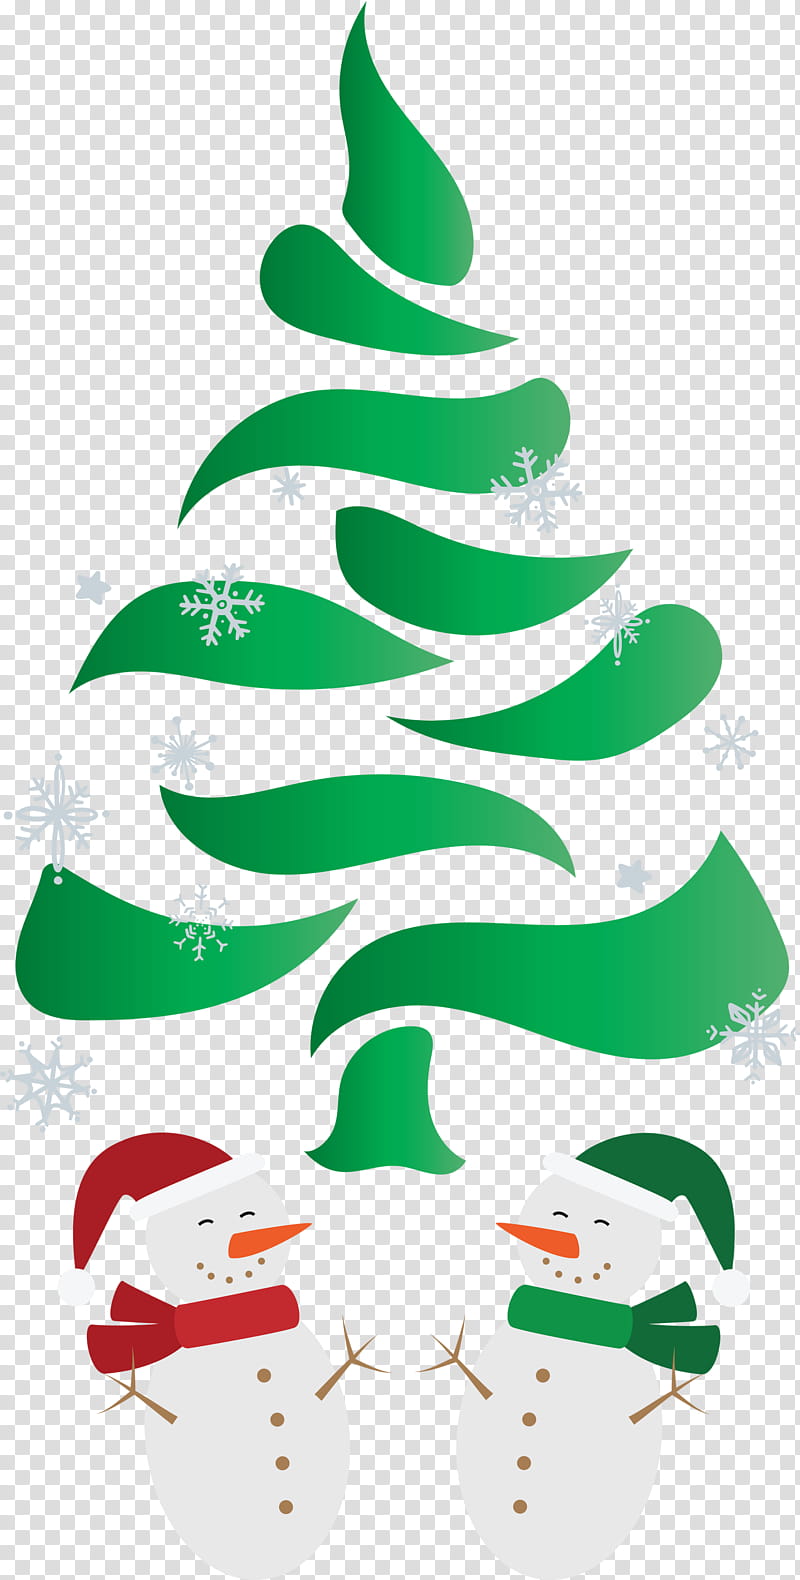 Christmas Tree Snowman, Christmas Ornament, Green, Christmas Day, Shoe, Text, Line, Leaf transparent background PNG clipart